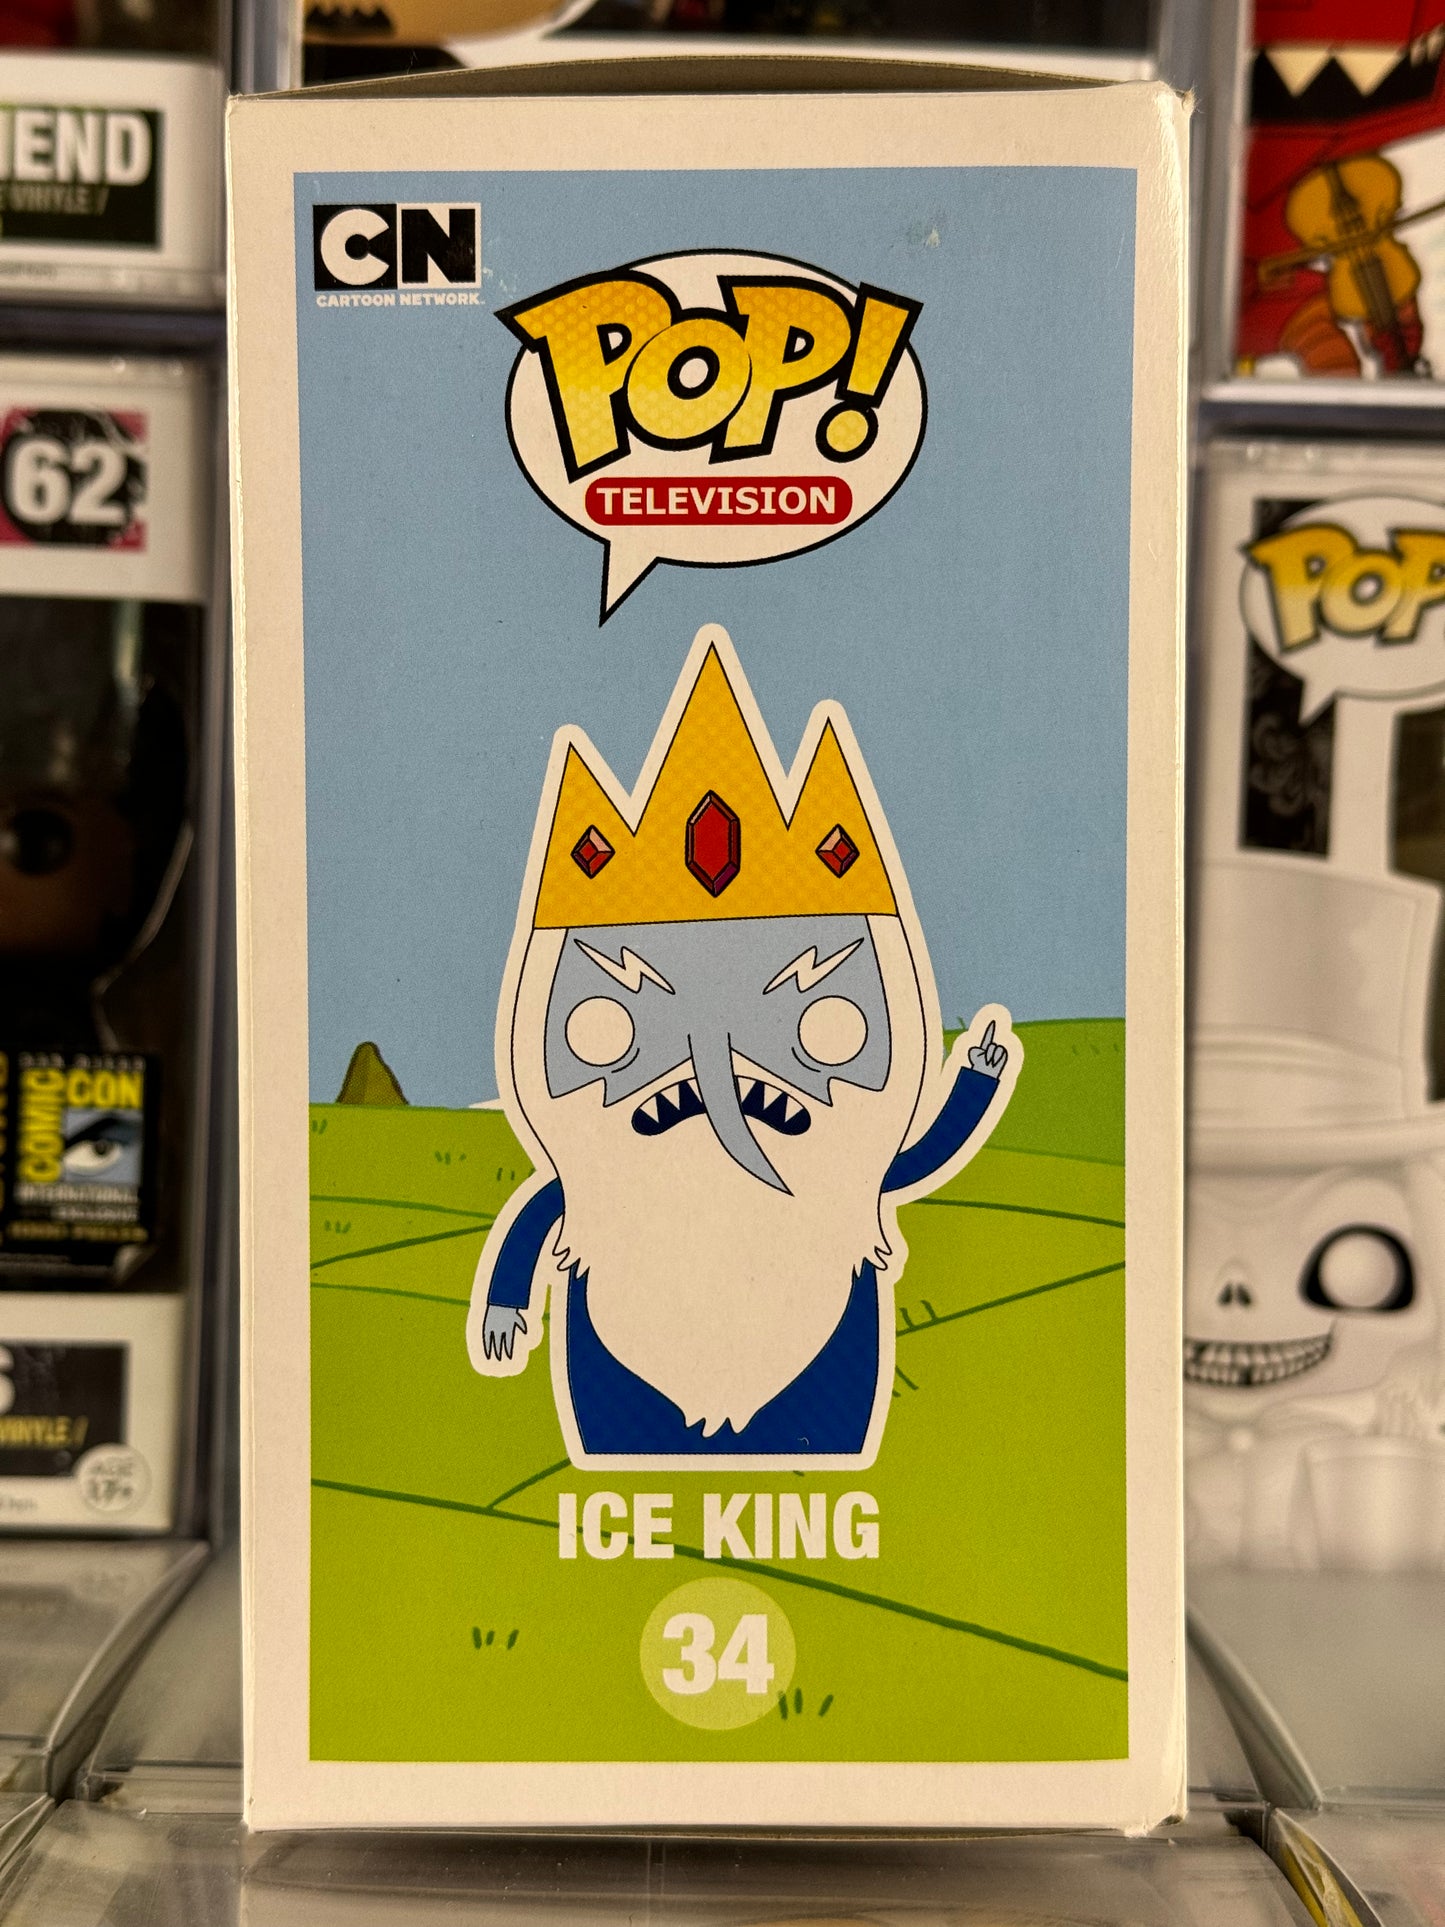 Adventure Time - Ice King (34) Vaulted